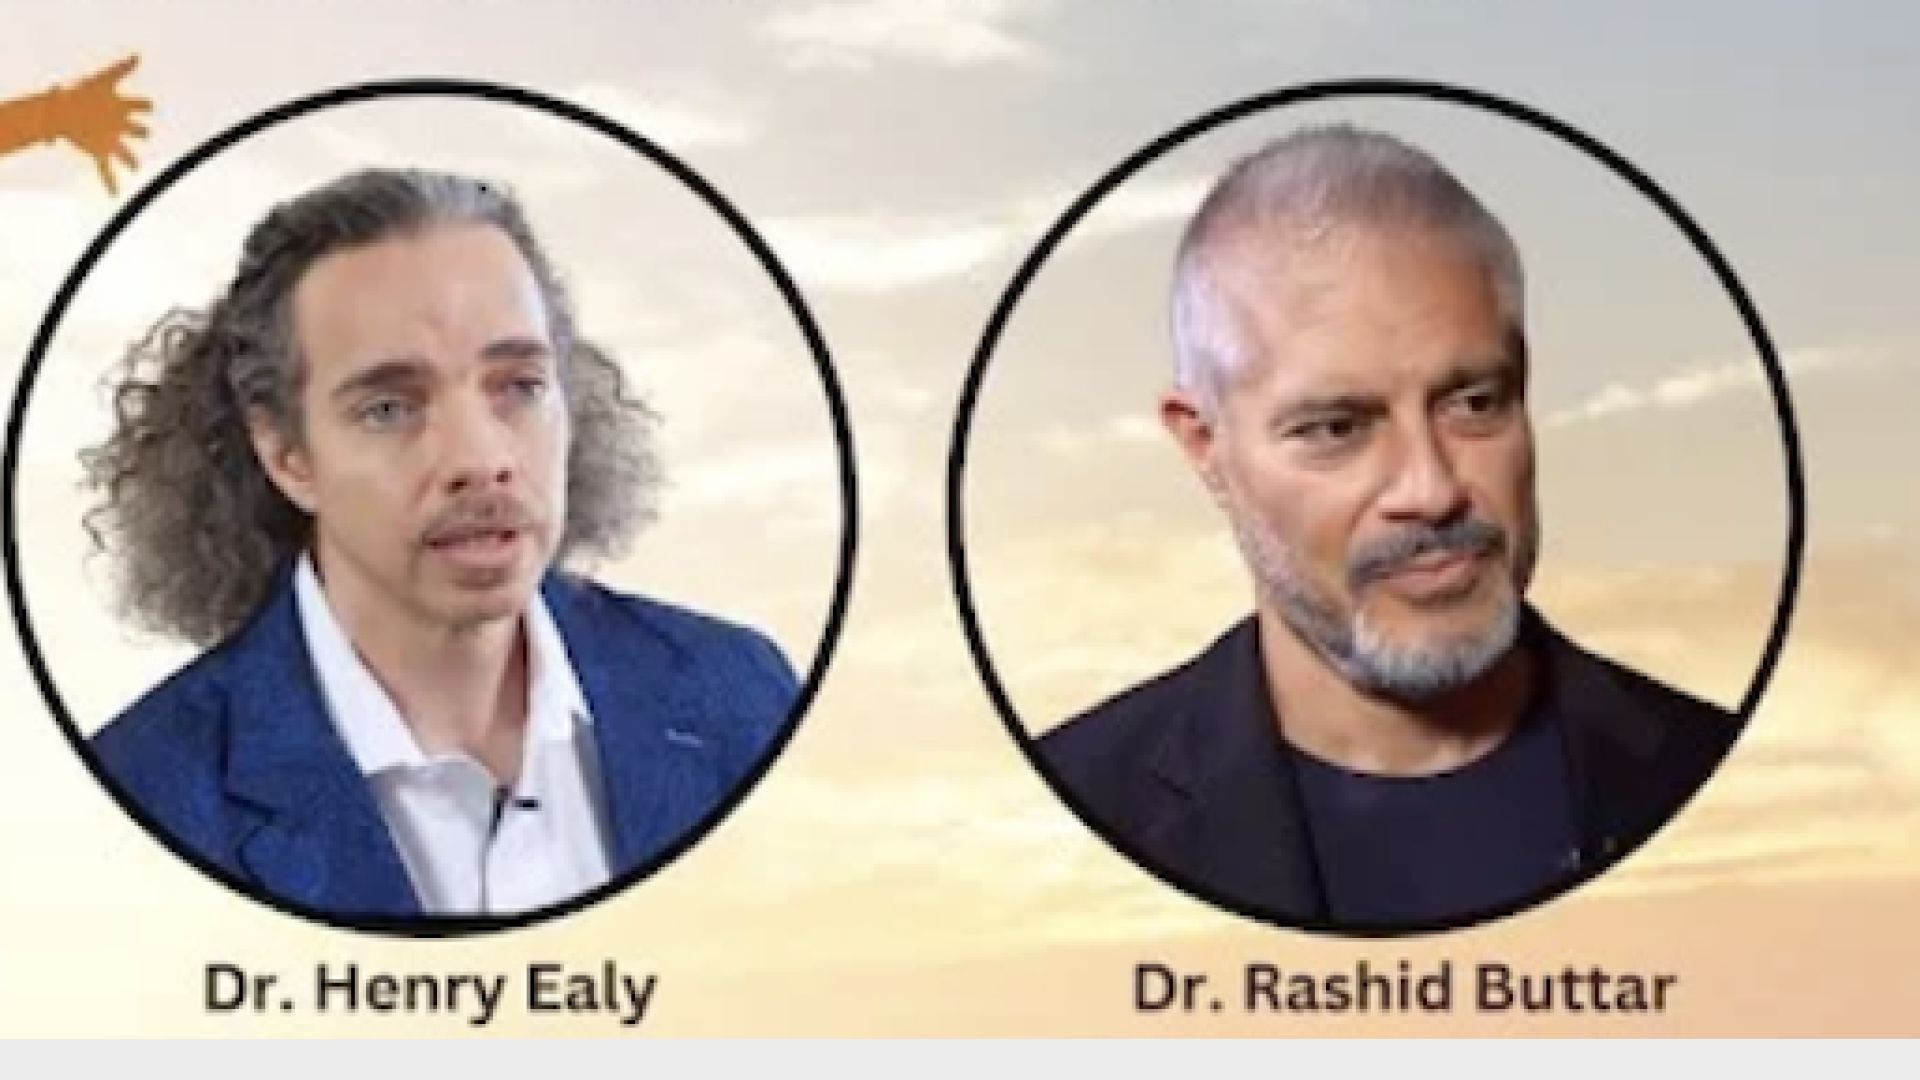 Live Q&A session with Dr. Henry Ealy & Dr. Rashid Buttar - 23 more hrs free viewing.